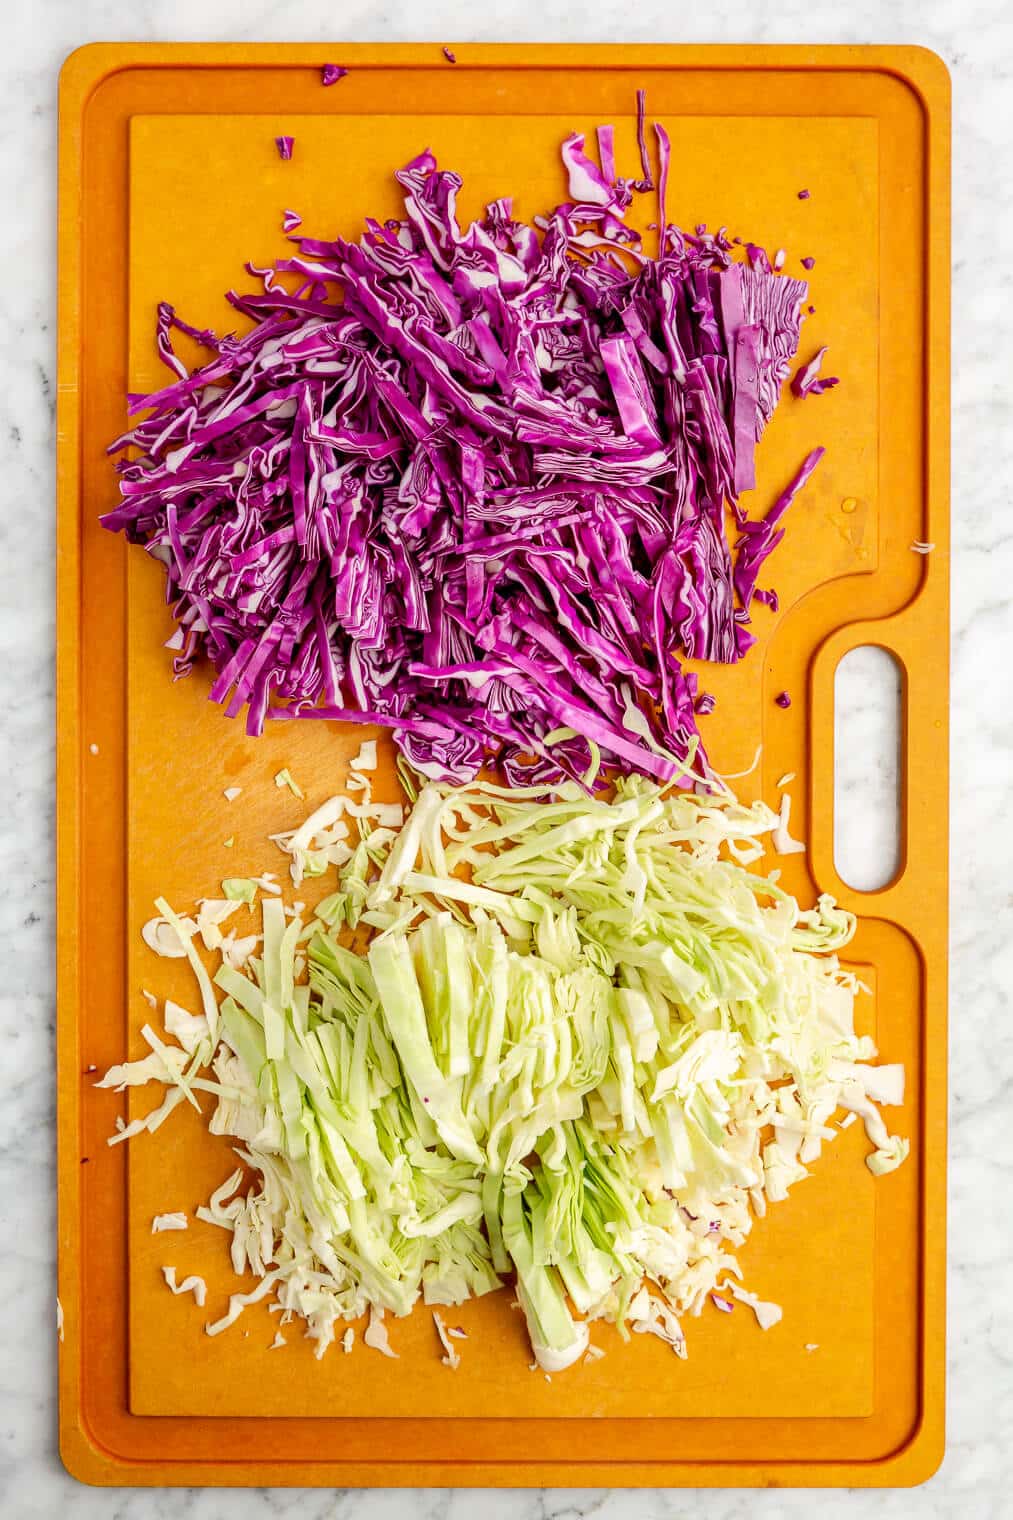 Shredded purple and green cabbage on a large epicurean cutting board.